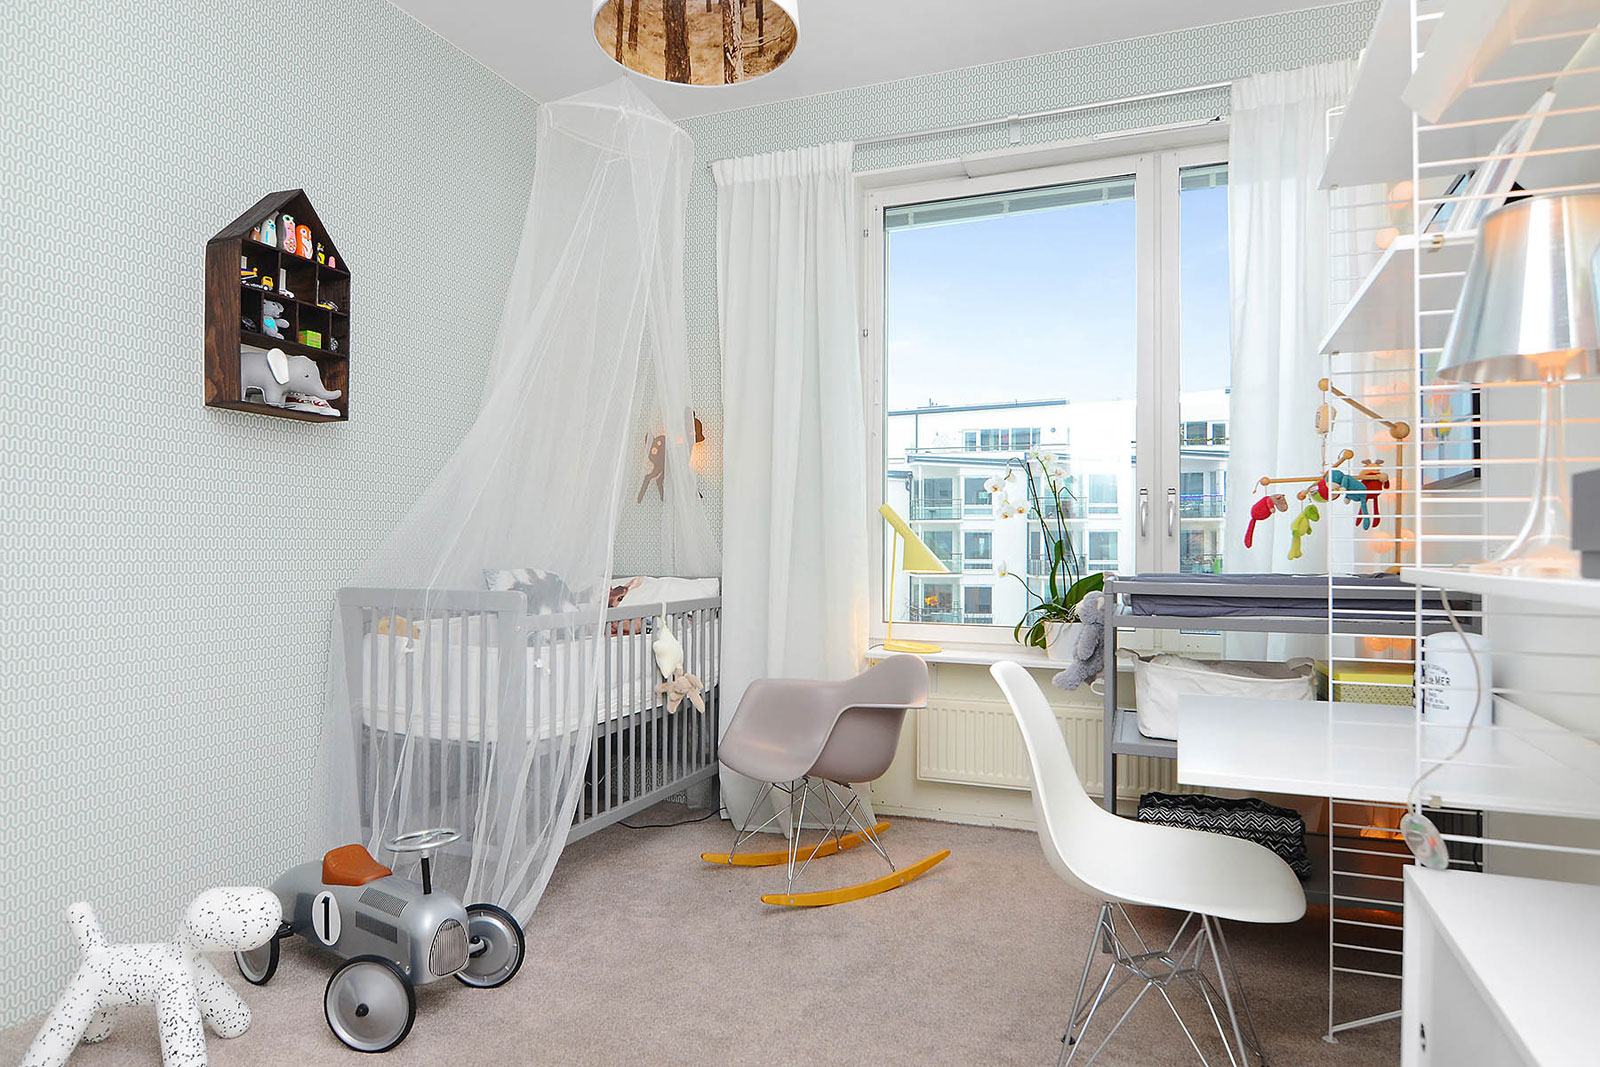 Kids Bedroom Cribs Appealing Kids Bedroom With Grey Cribs Equipped By Transparent Kids Room Curtains Furnished With Rocking Chair And Furnished With White Desk Also Chair Decoration The Better Appearance Through The Kids Room Curtains